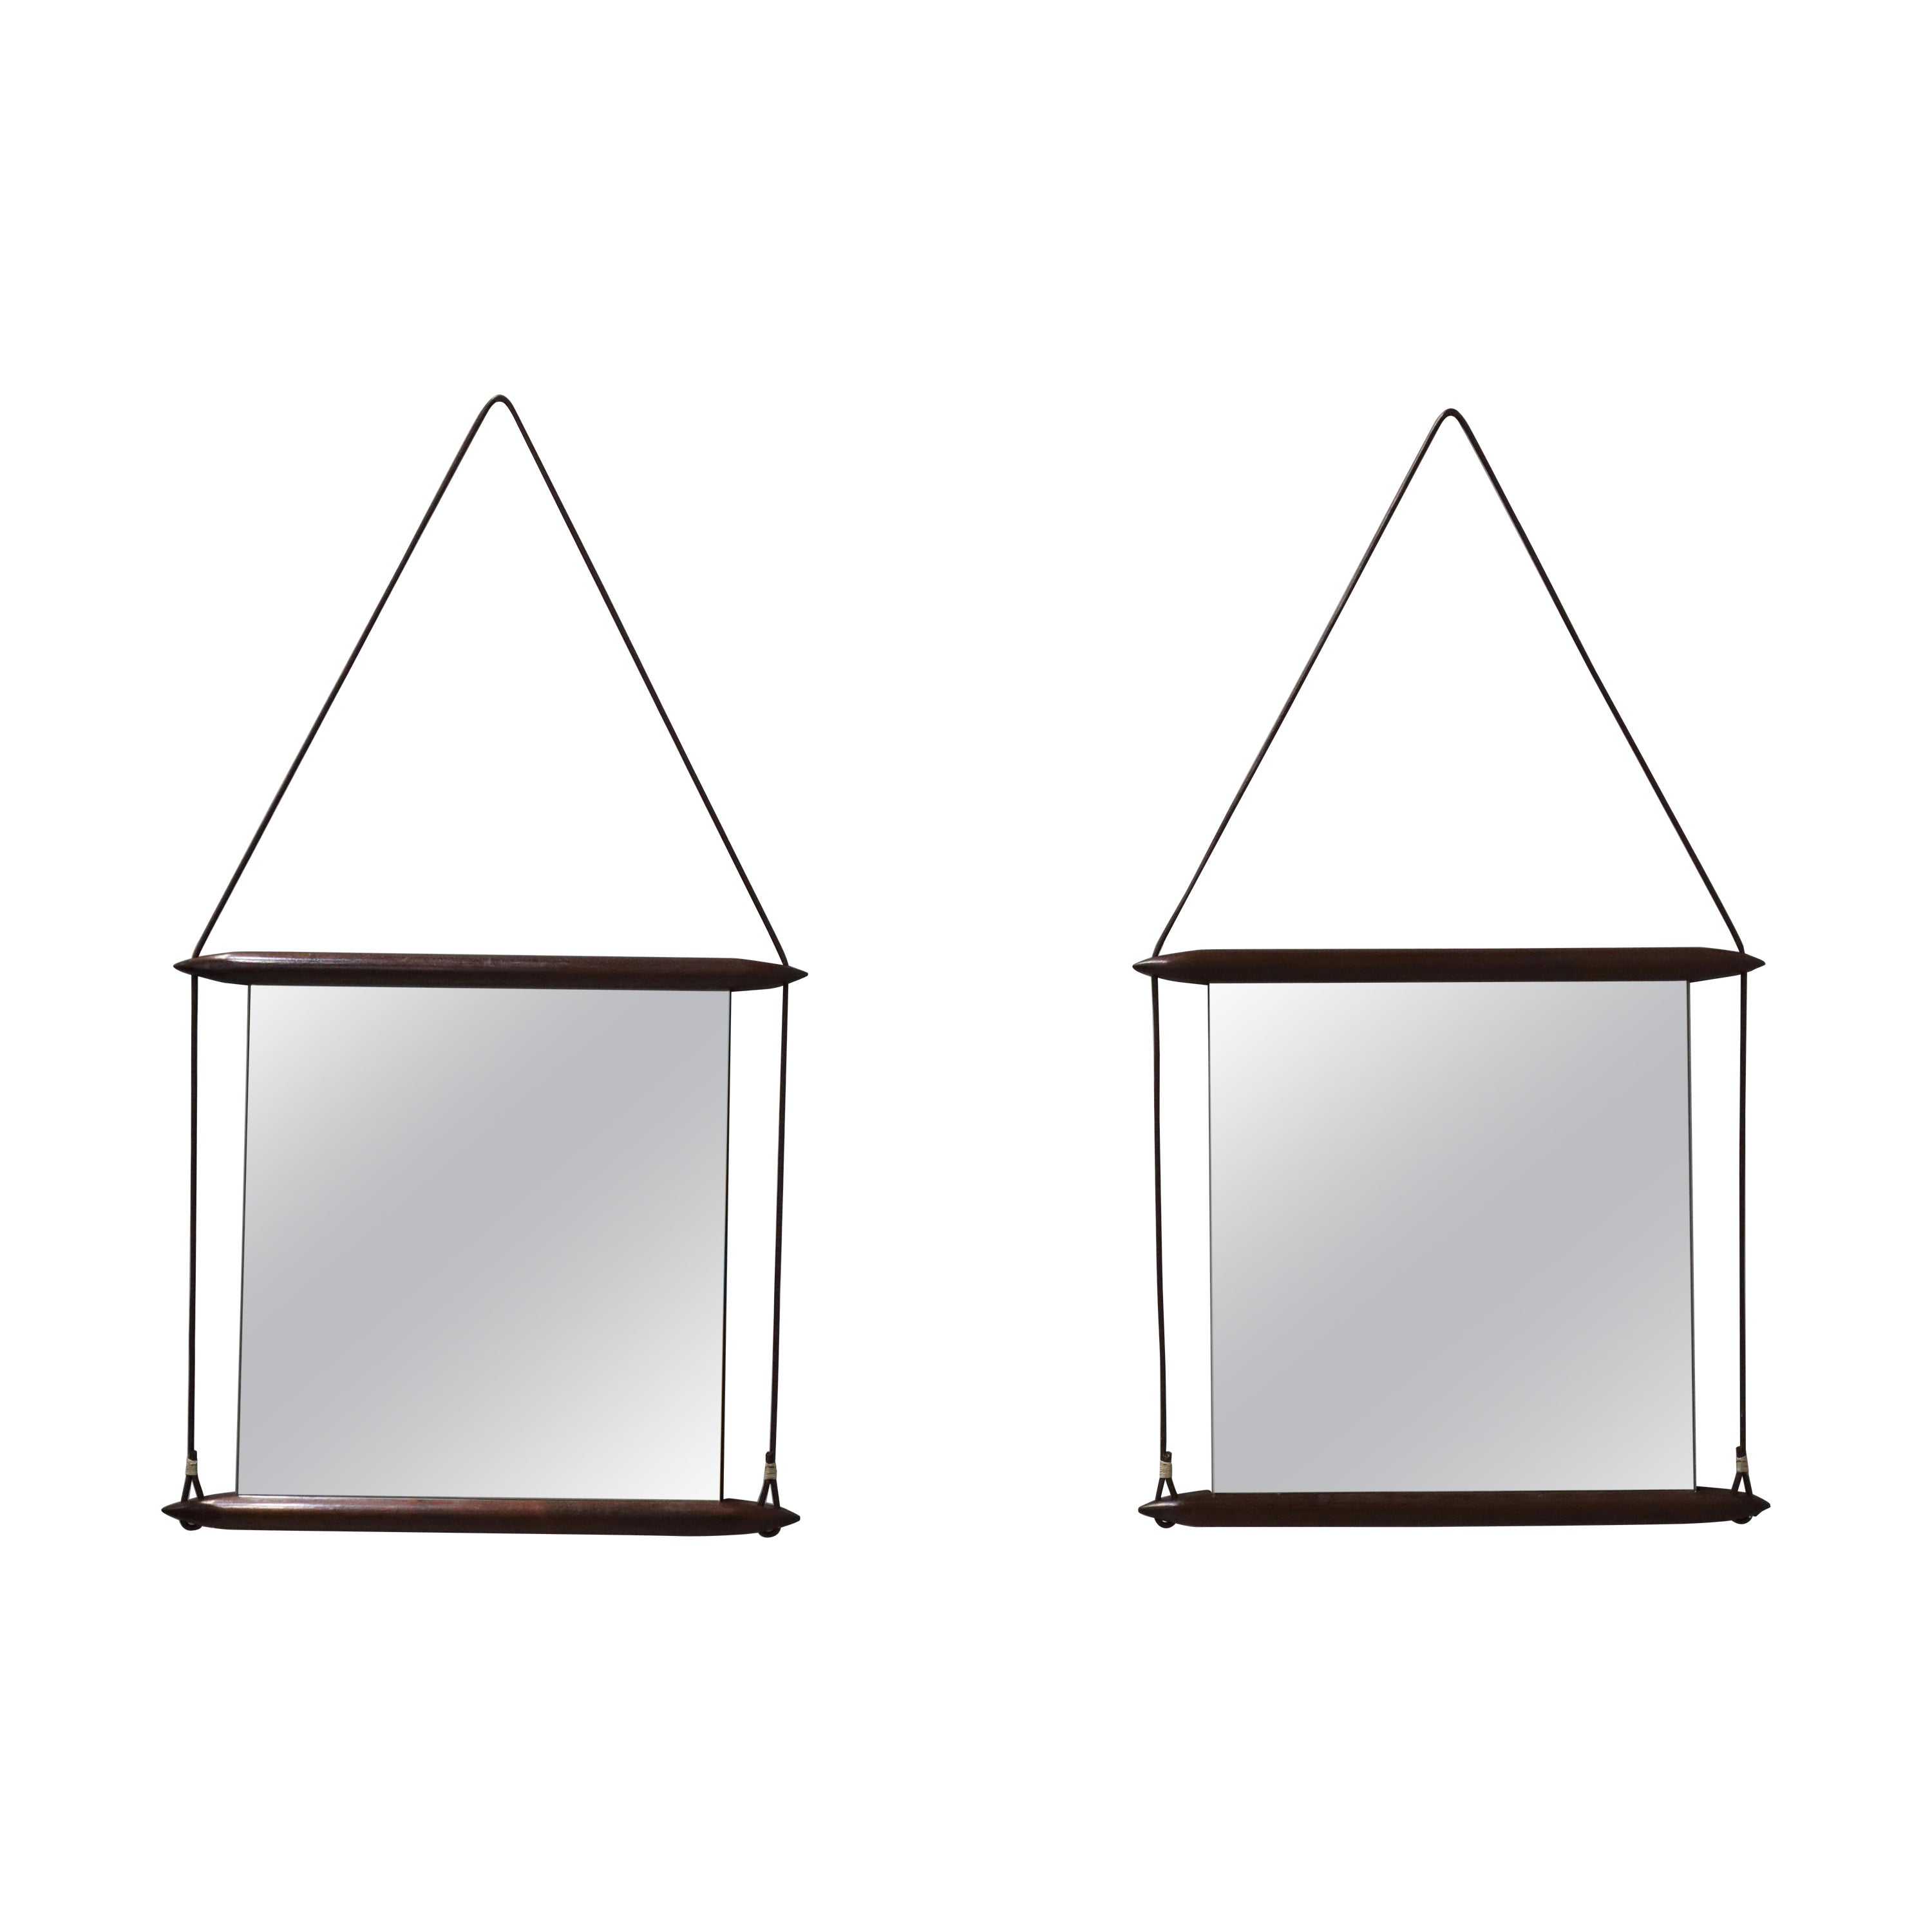 Pair Of Suspended Mirrors "Paraggi" by Ico Parisi for MIM, Italy, 1958 For Sale